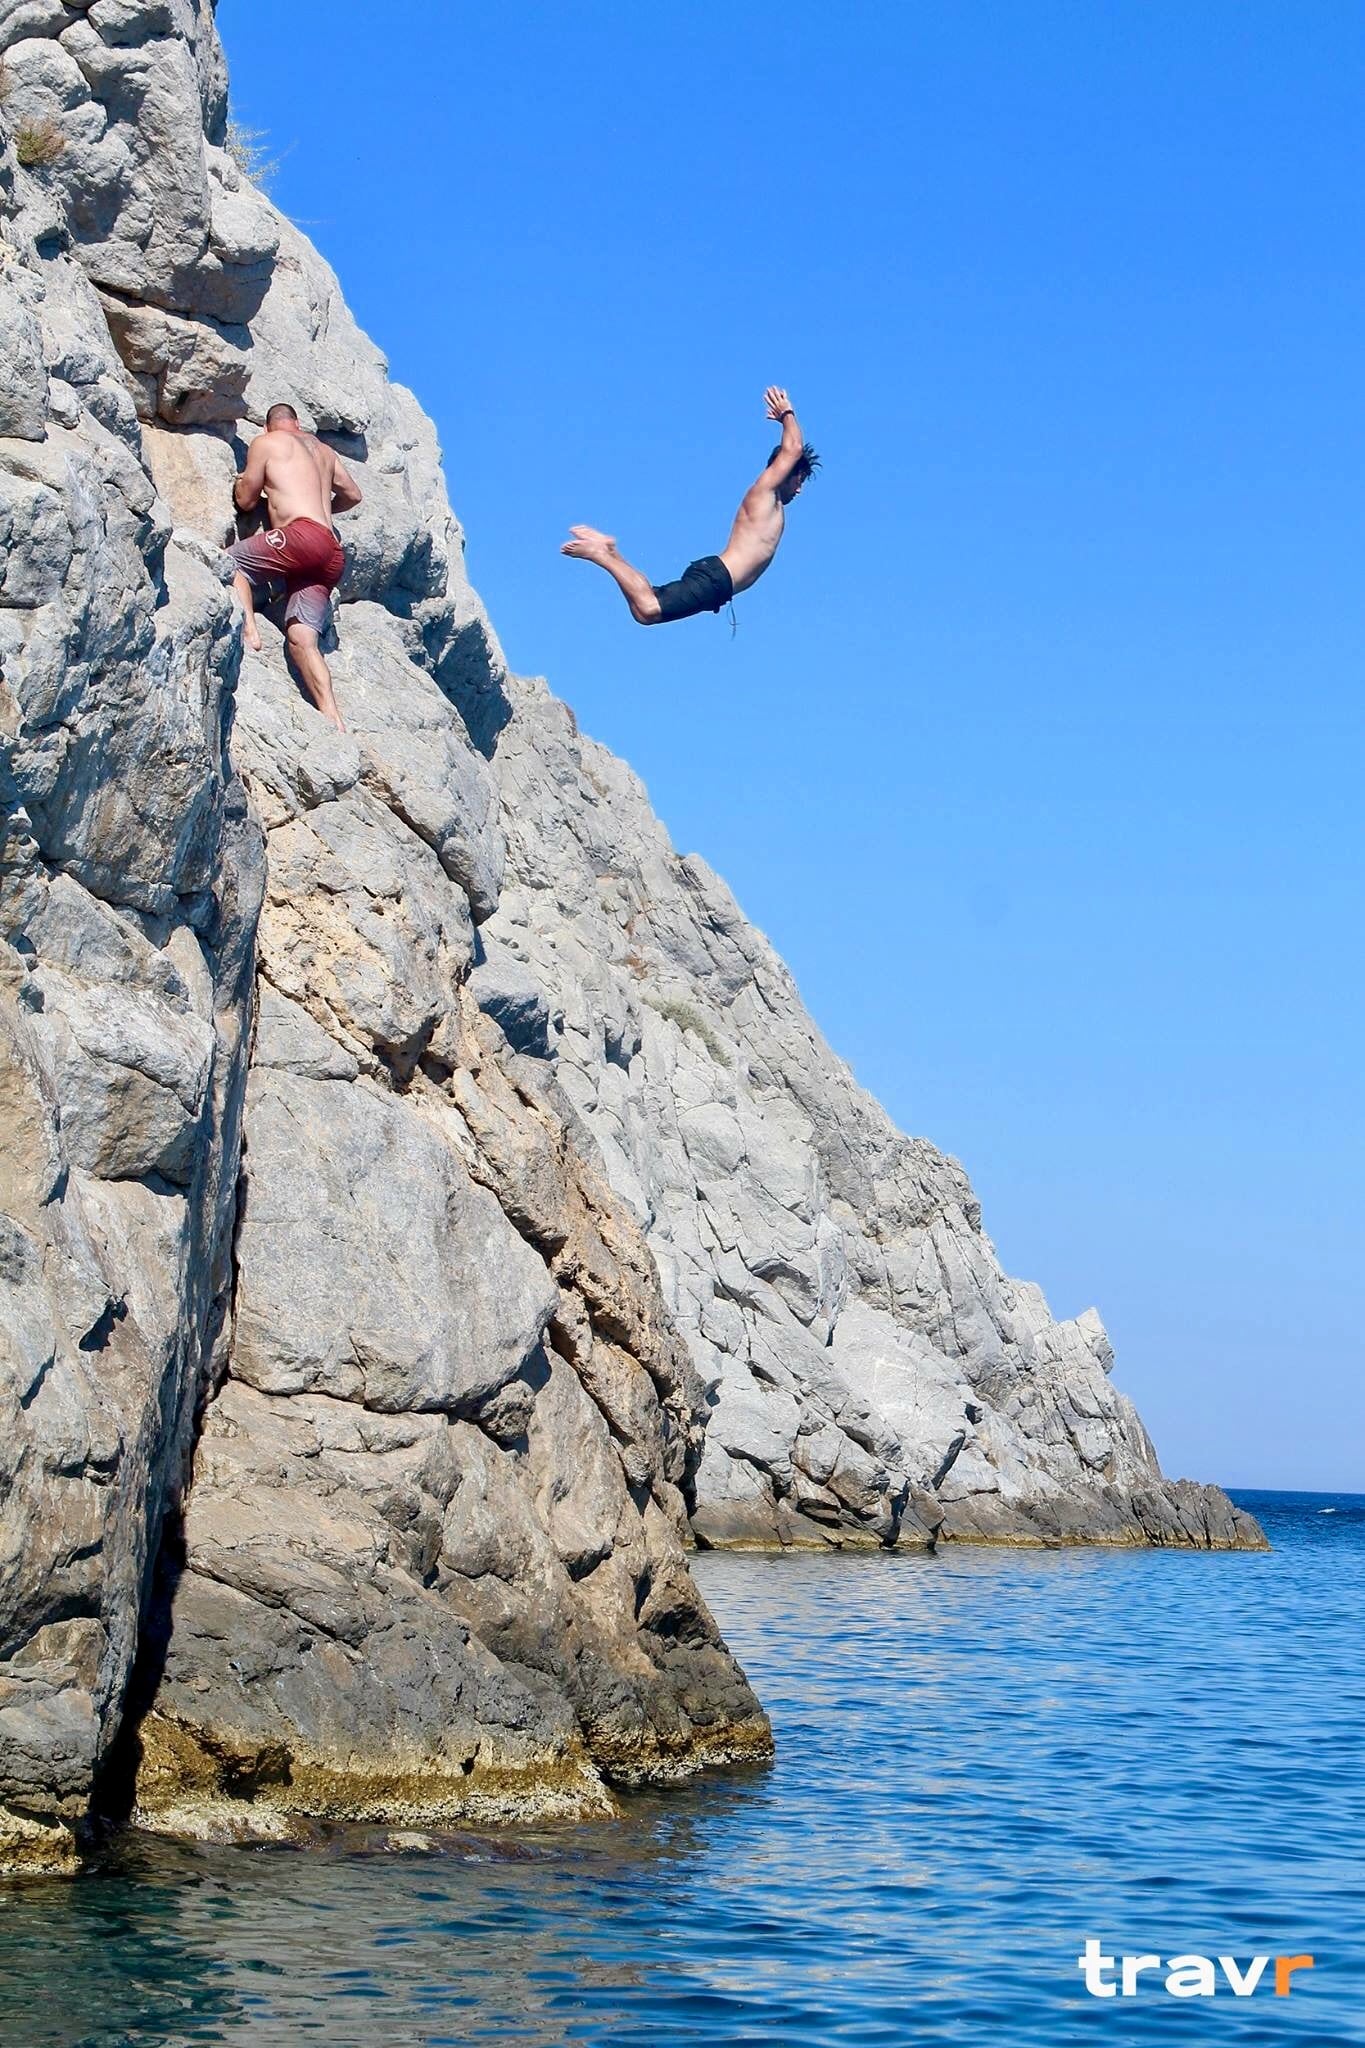 steven jumping off a cliff in greece